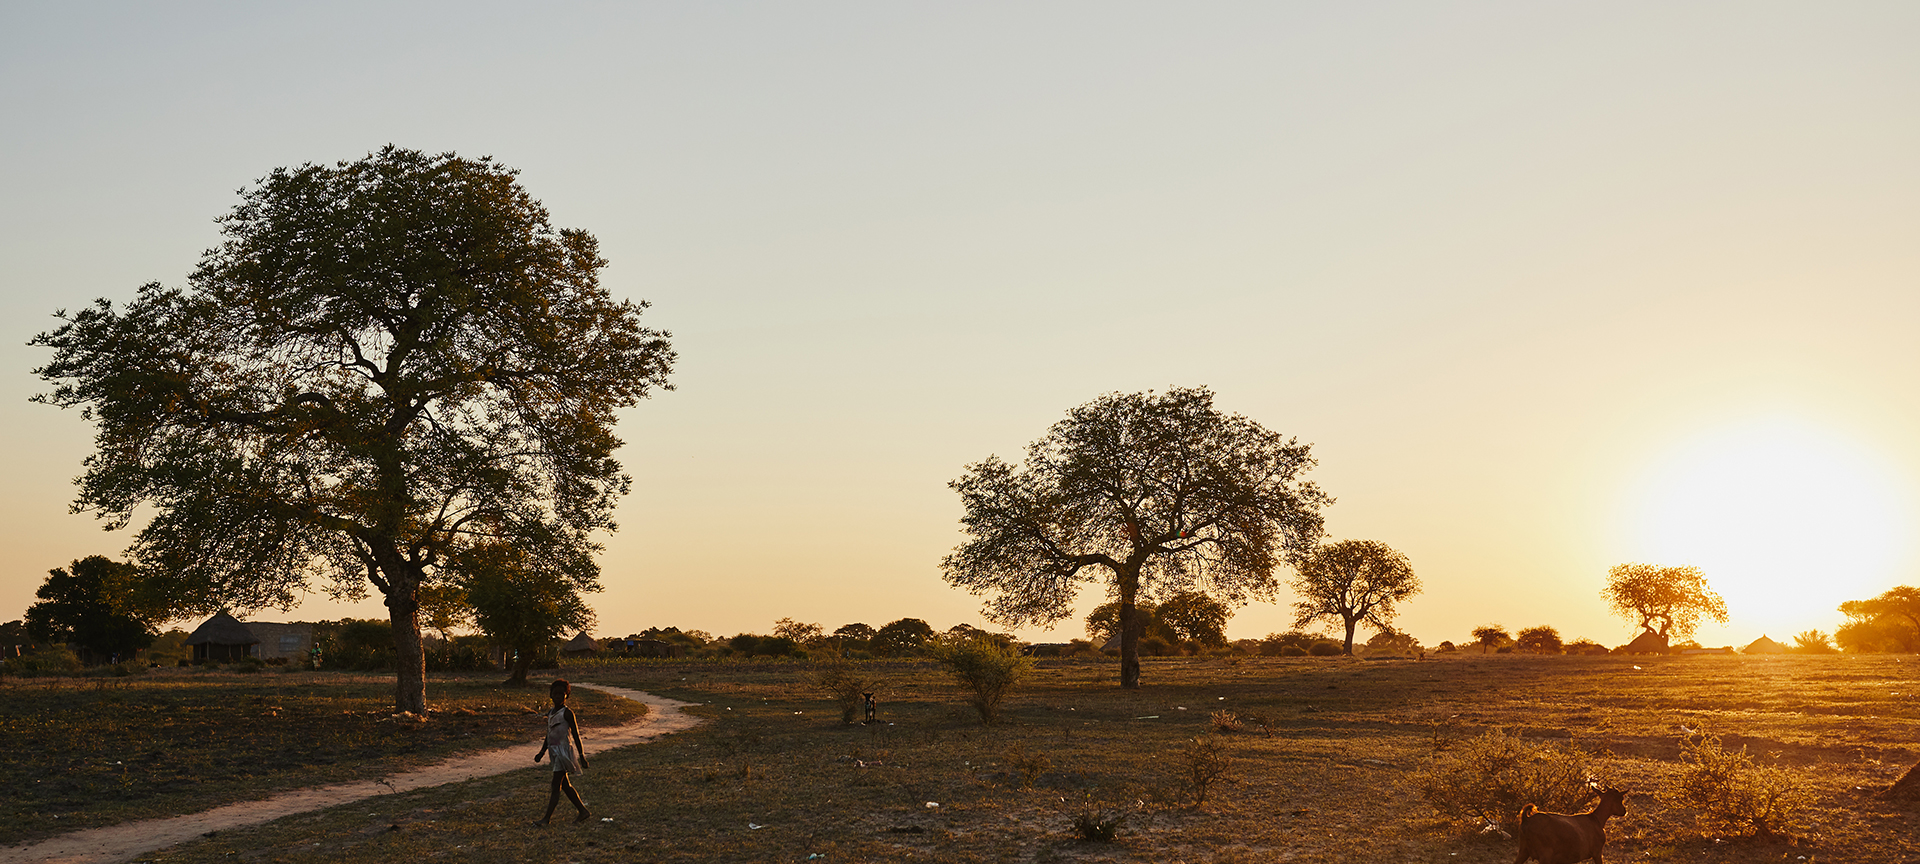 A person walking along a dirt road as the sun sets in a rural area. 